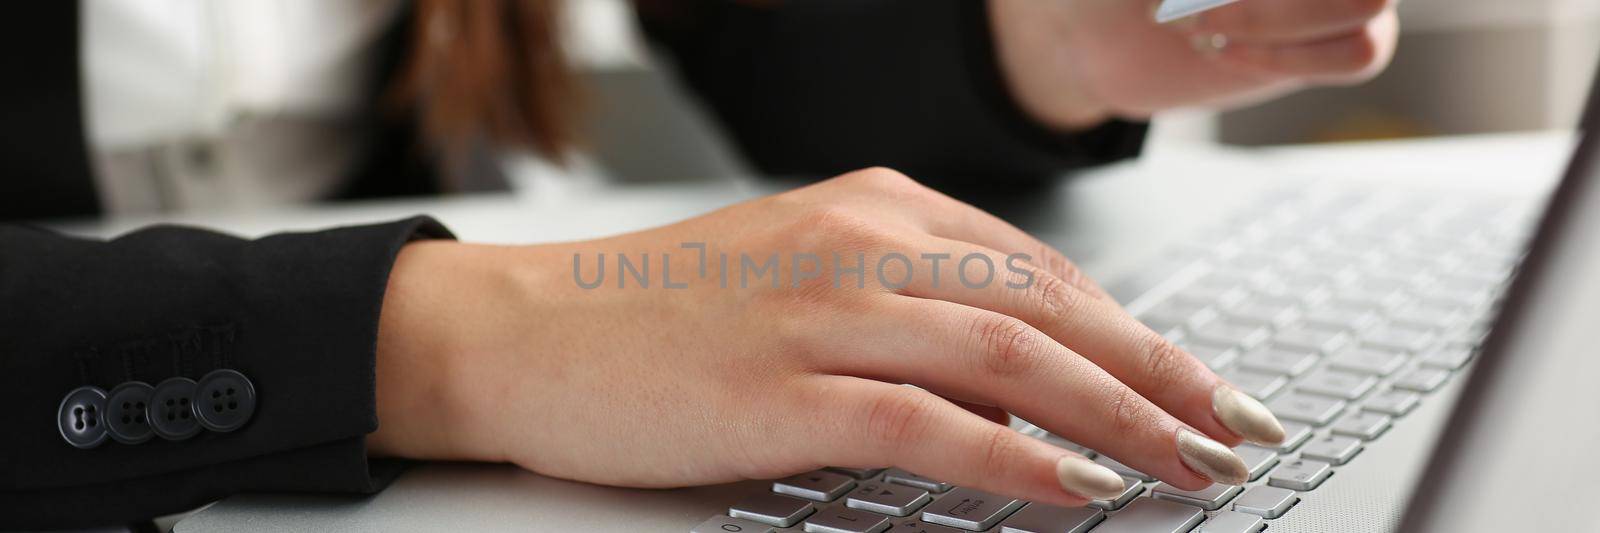 Close-up of woman press knobs on keyboard, pay online with credit card, remote shopping on laptop. Online shopping, technology, contactless payment concept